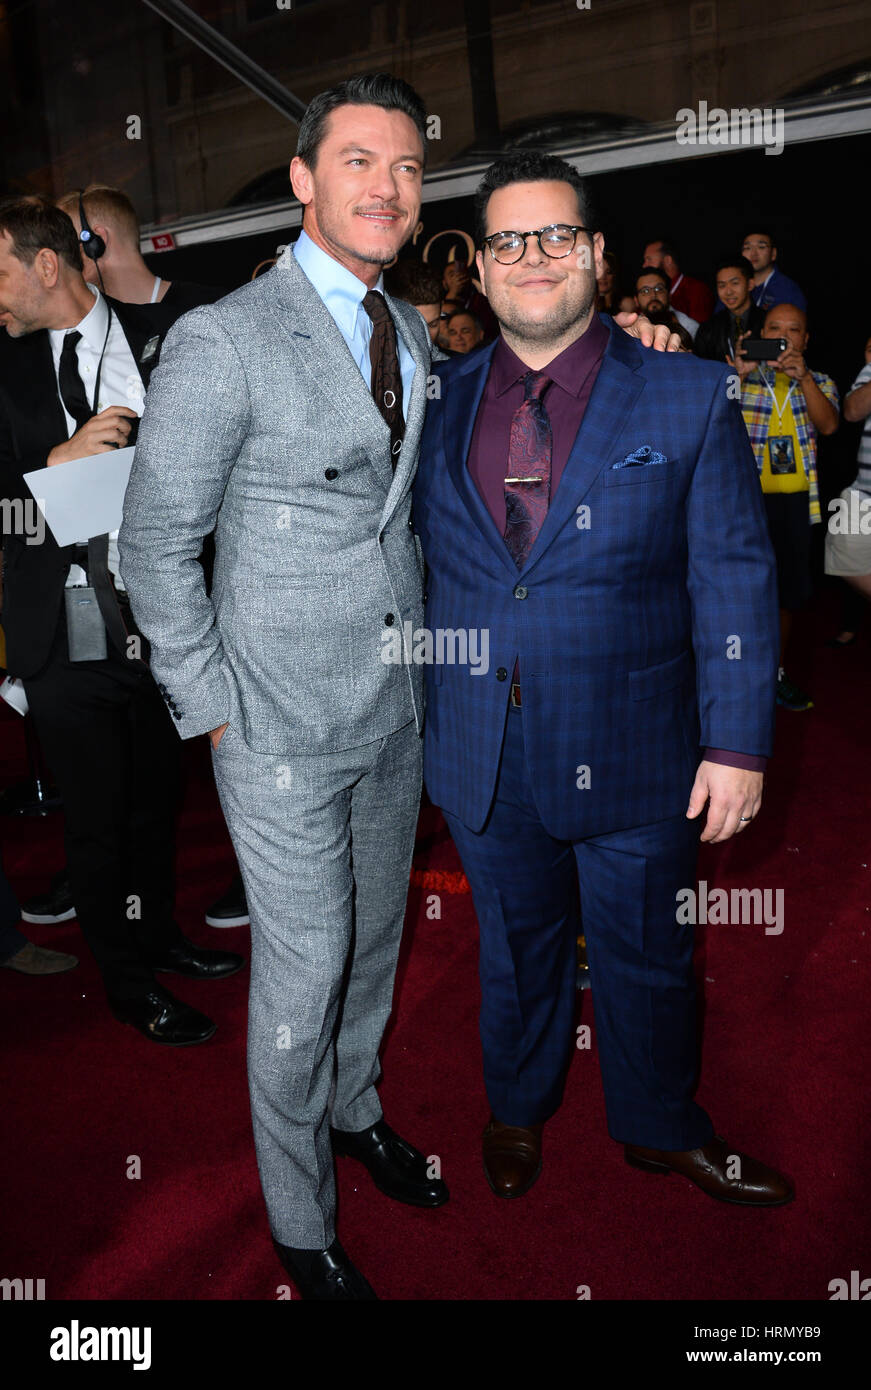 Los Angeles, USA. 02nd Mar, 2017. Actors Luke Evans & Josh Gad at the premiere for Disney's 'Beauty and the Beast' at the El Capitan Theatre, Hollywood. Picture Credit: Sarah Stewart/Alamy Live News Stock Photo